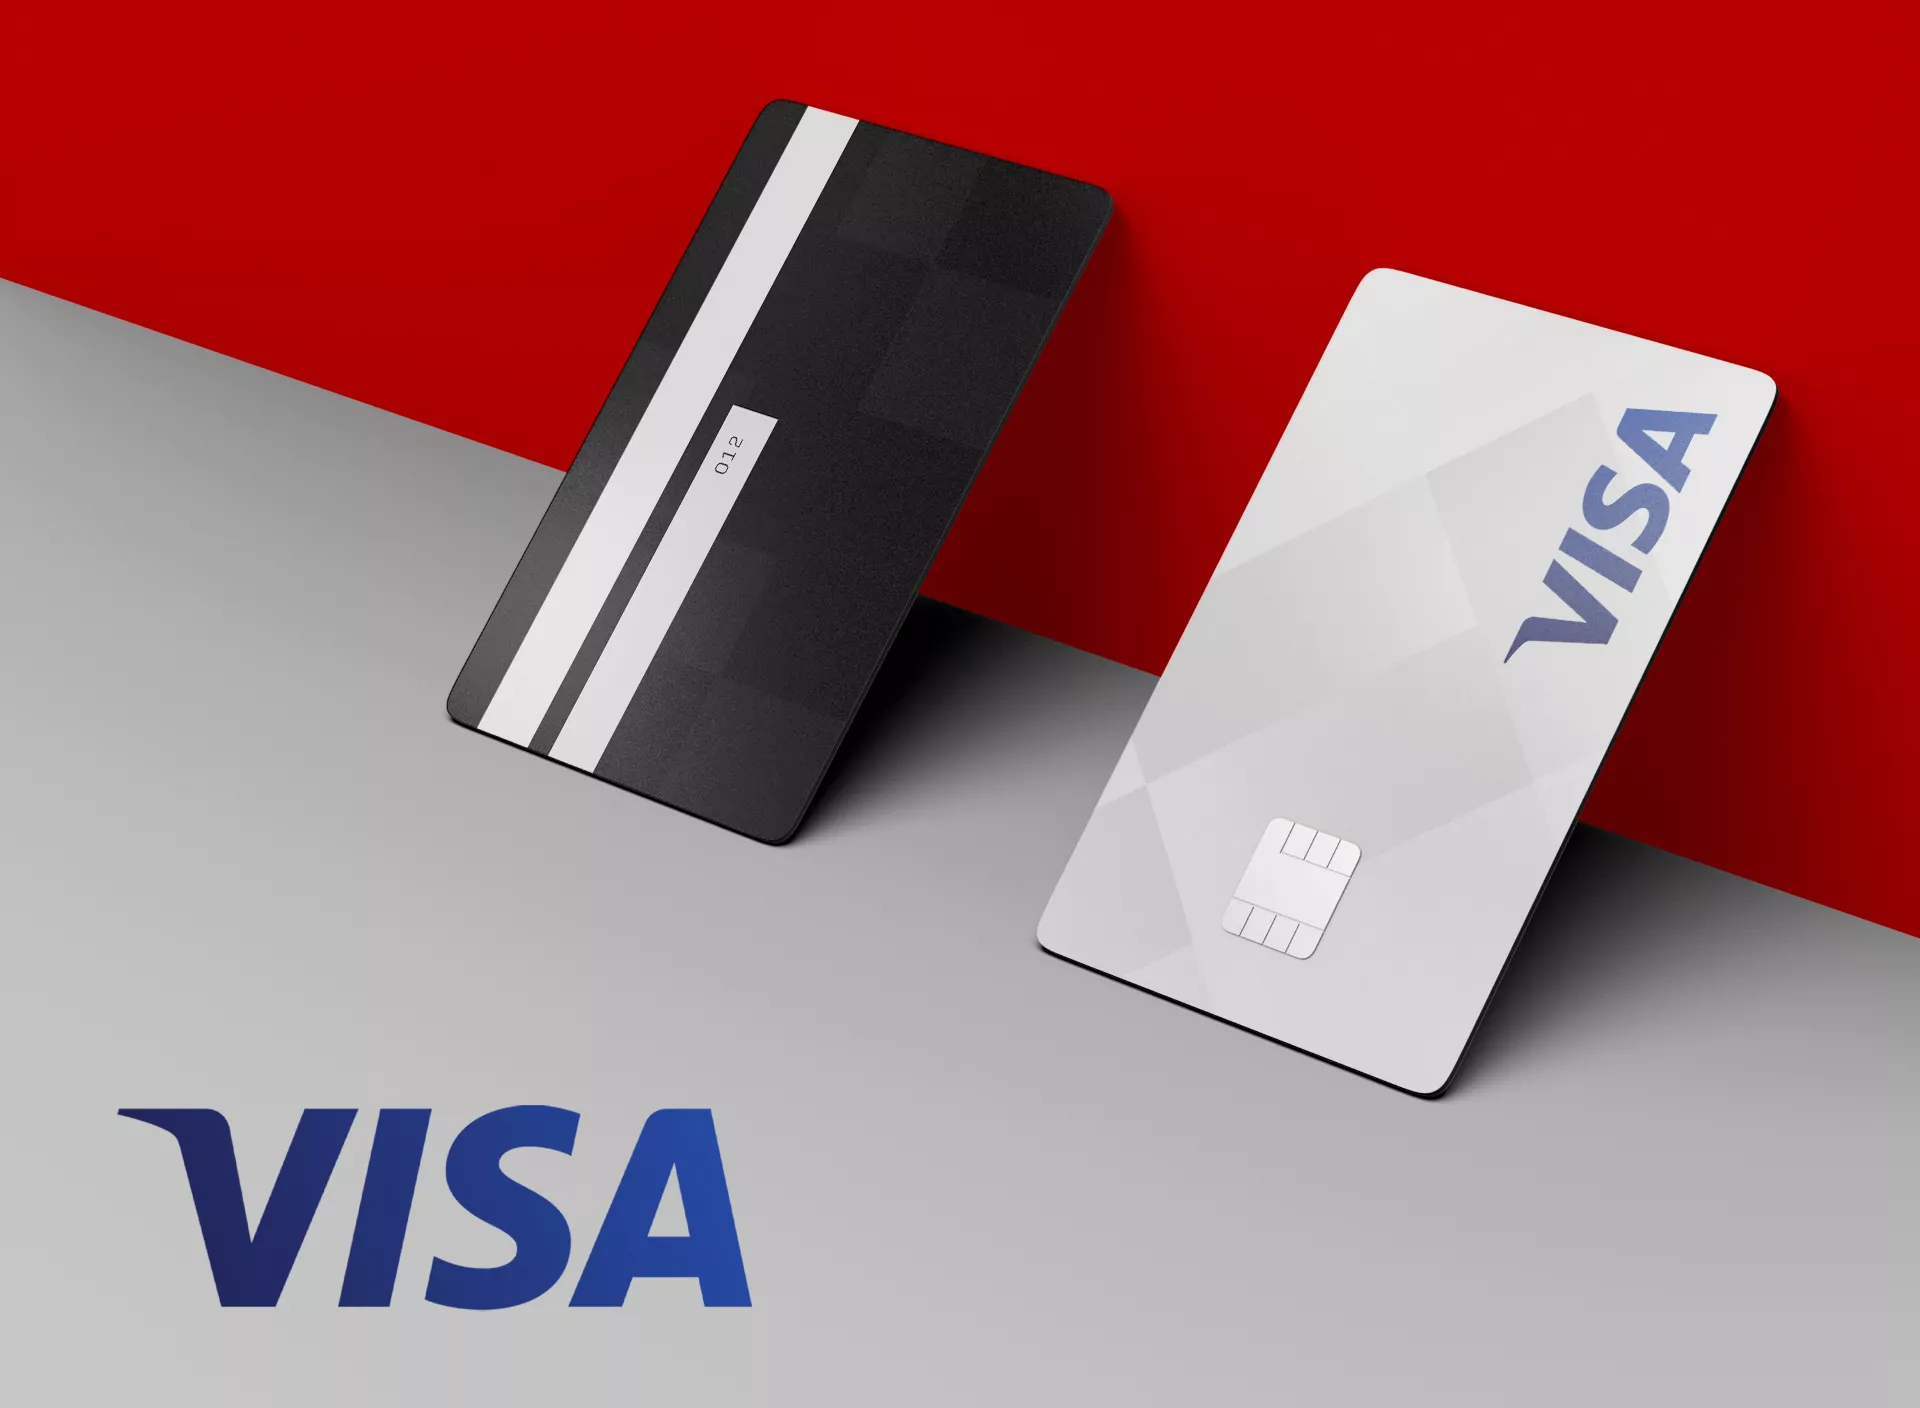 Visa is an international payment system that is accepted everywhere including online betting sites.